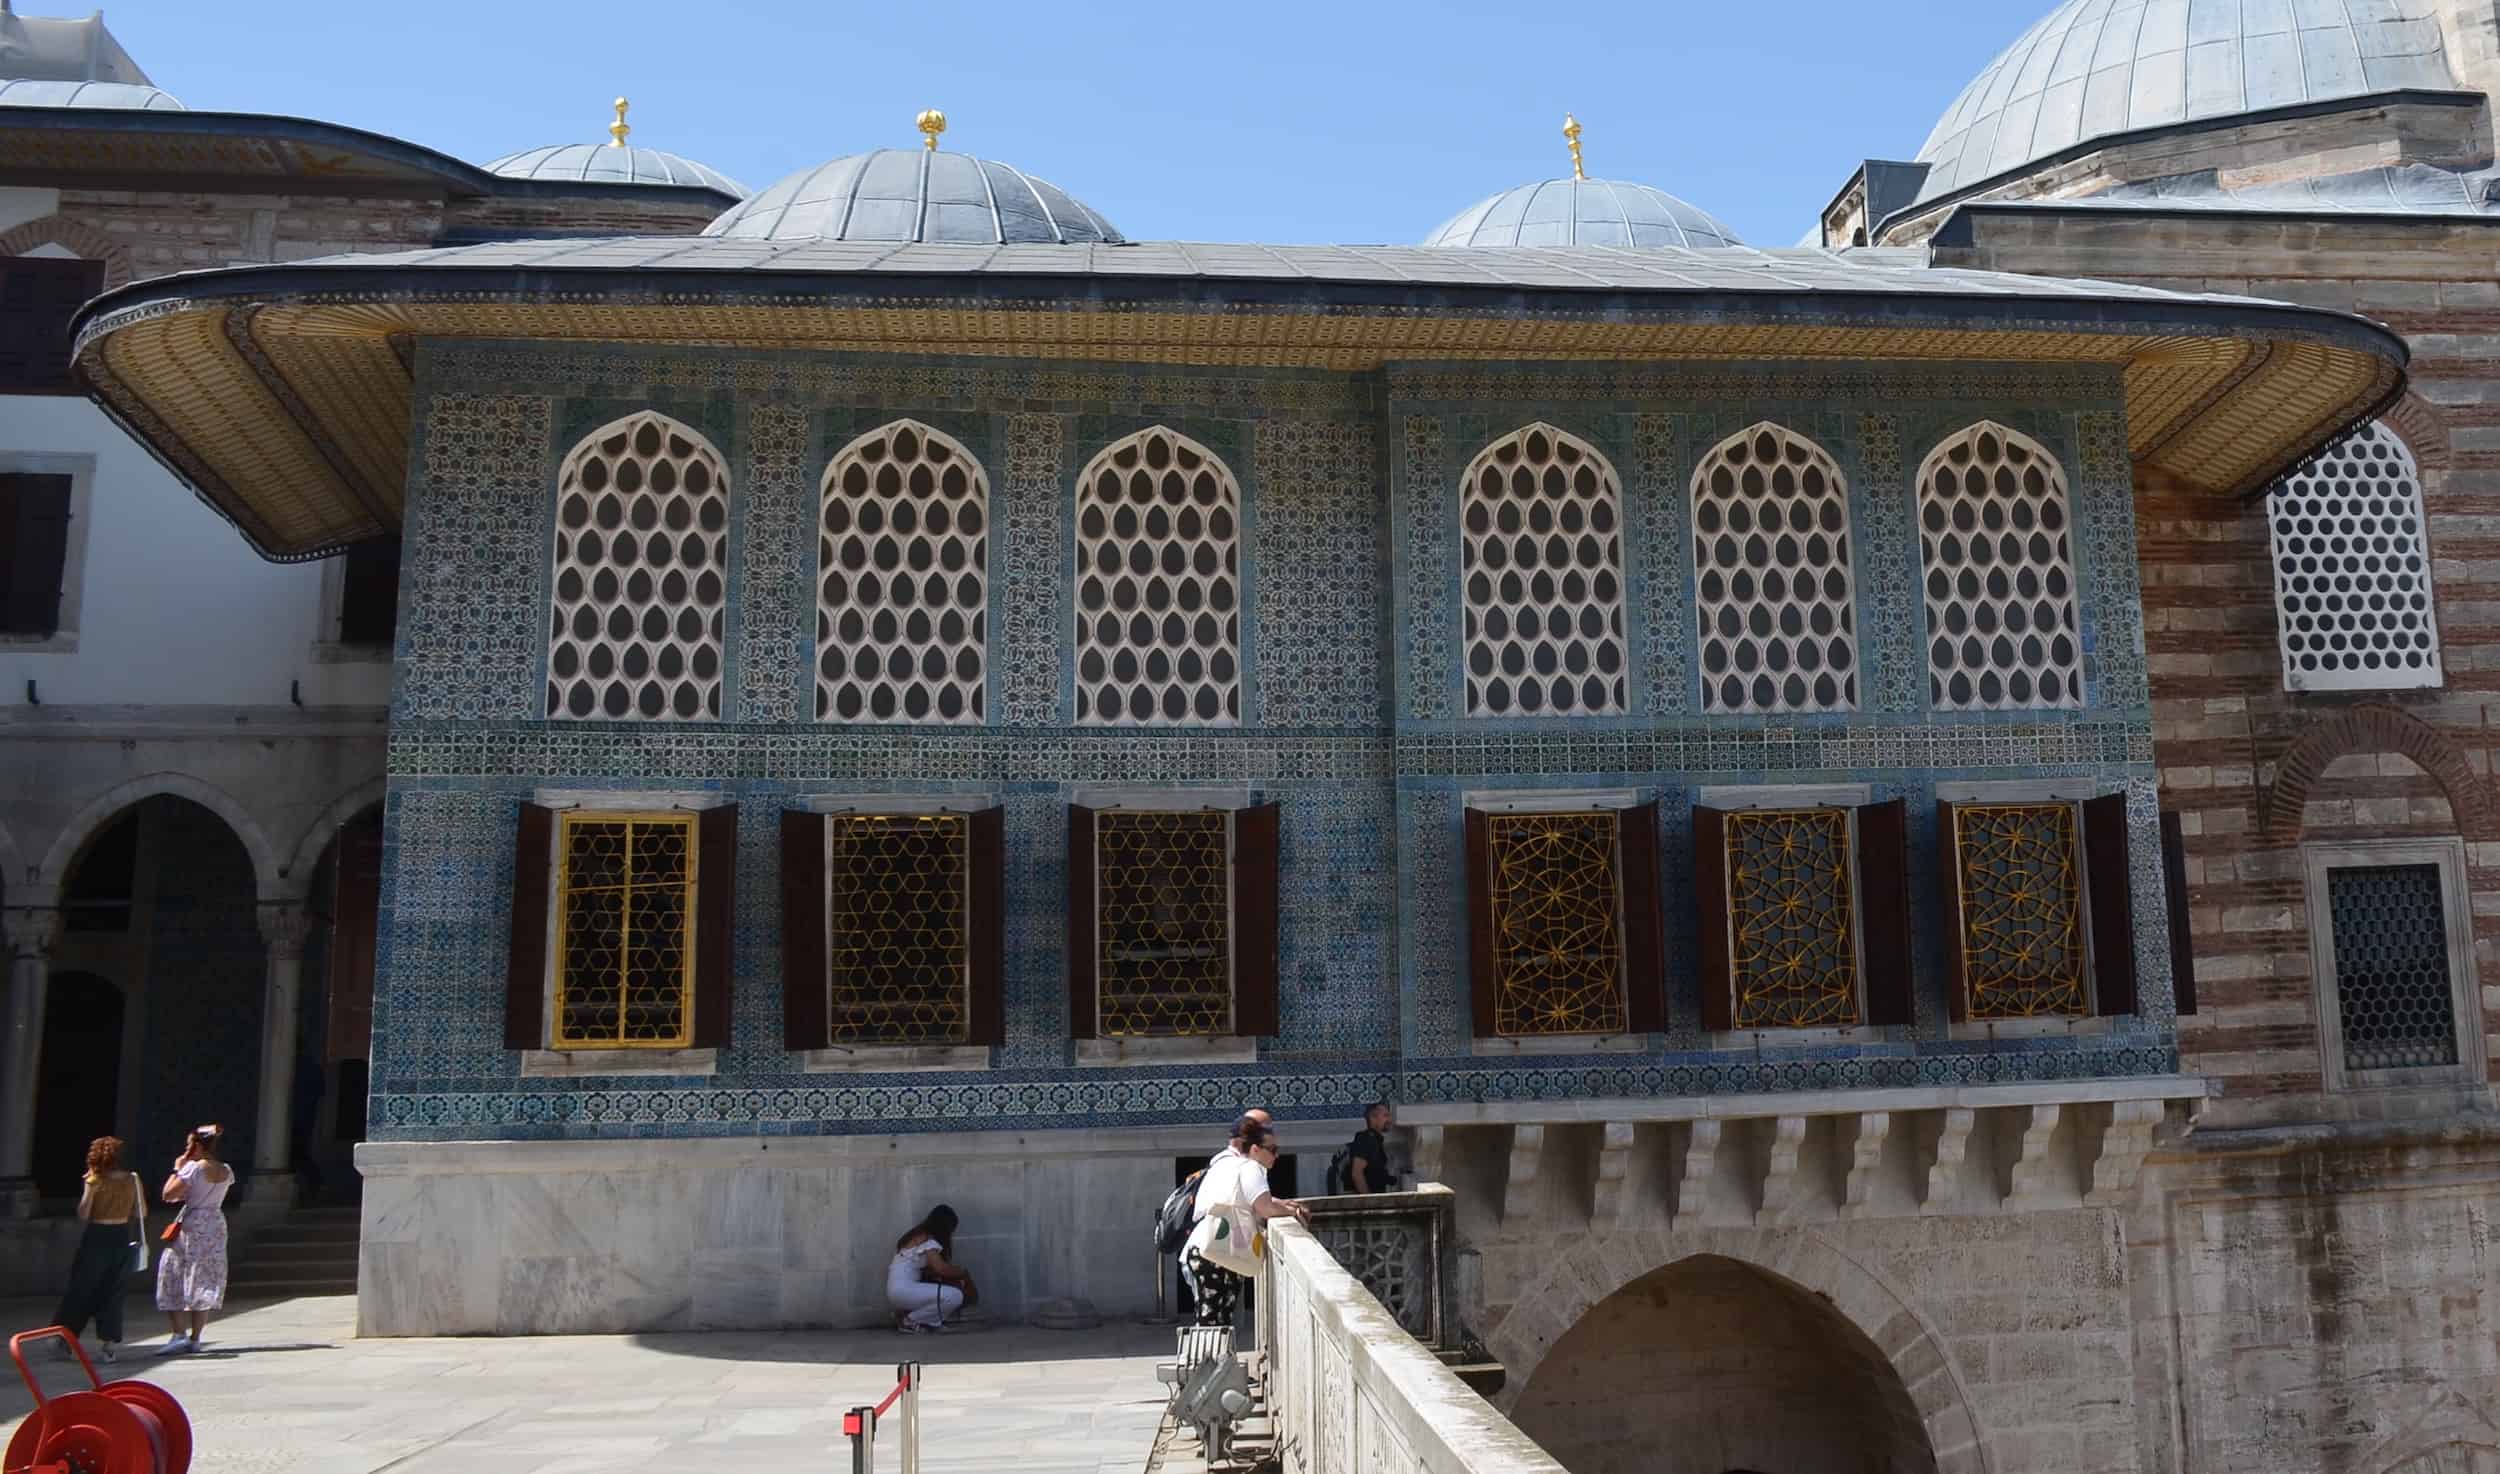 Twin Kiosk in the Imperial Harem at Topkapi Palace in Istanbul, Turkey